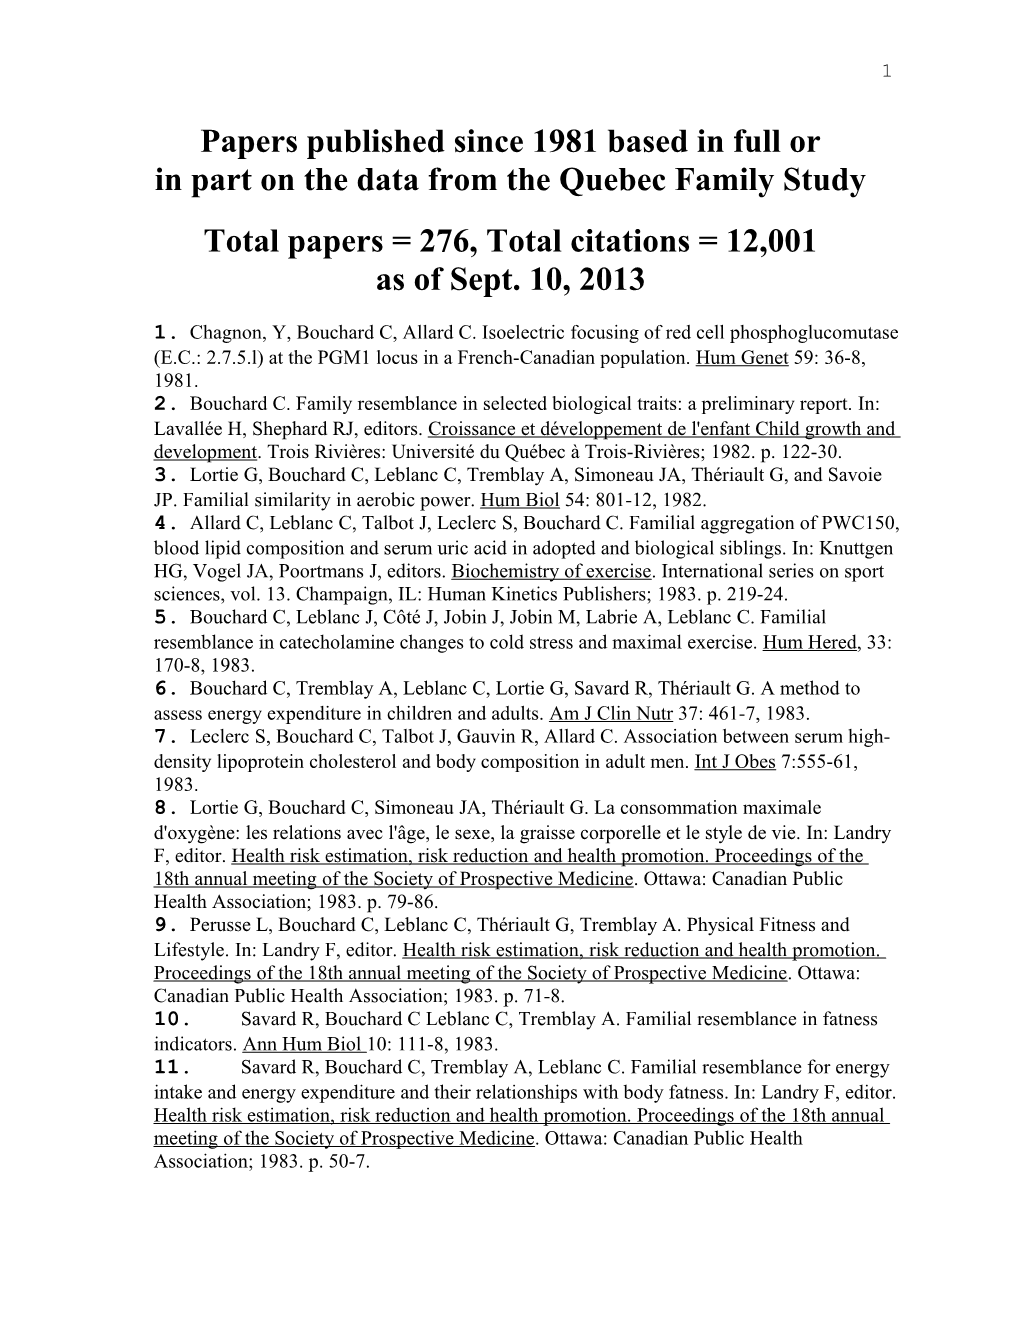 Papers Published Since 1981 Based in Full Or in Part on the Data from the Quebec Family Study